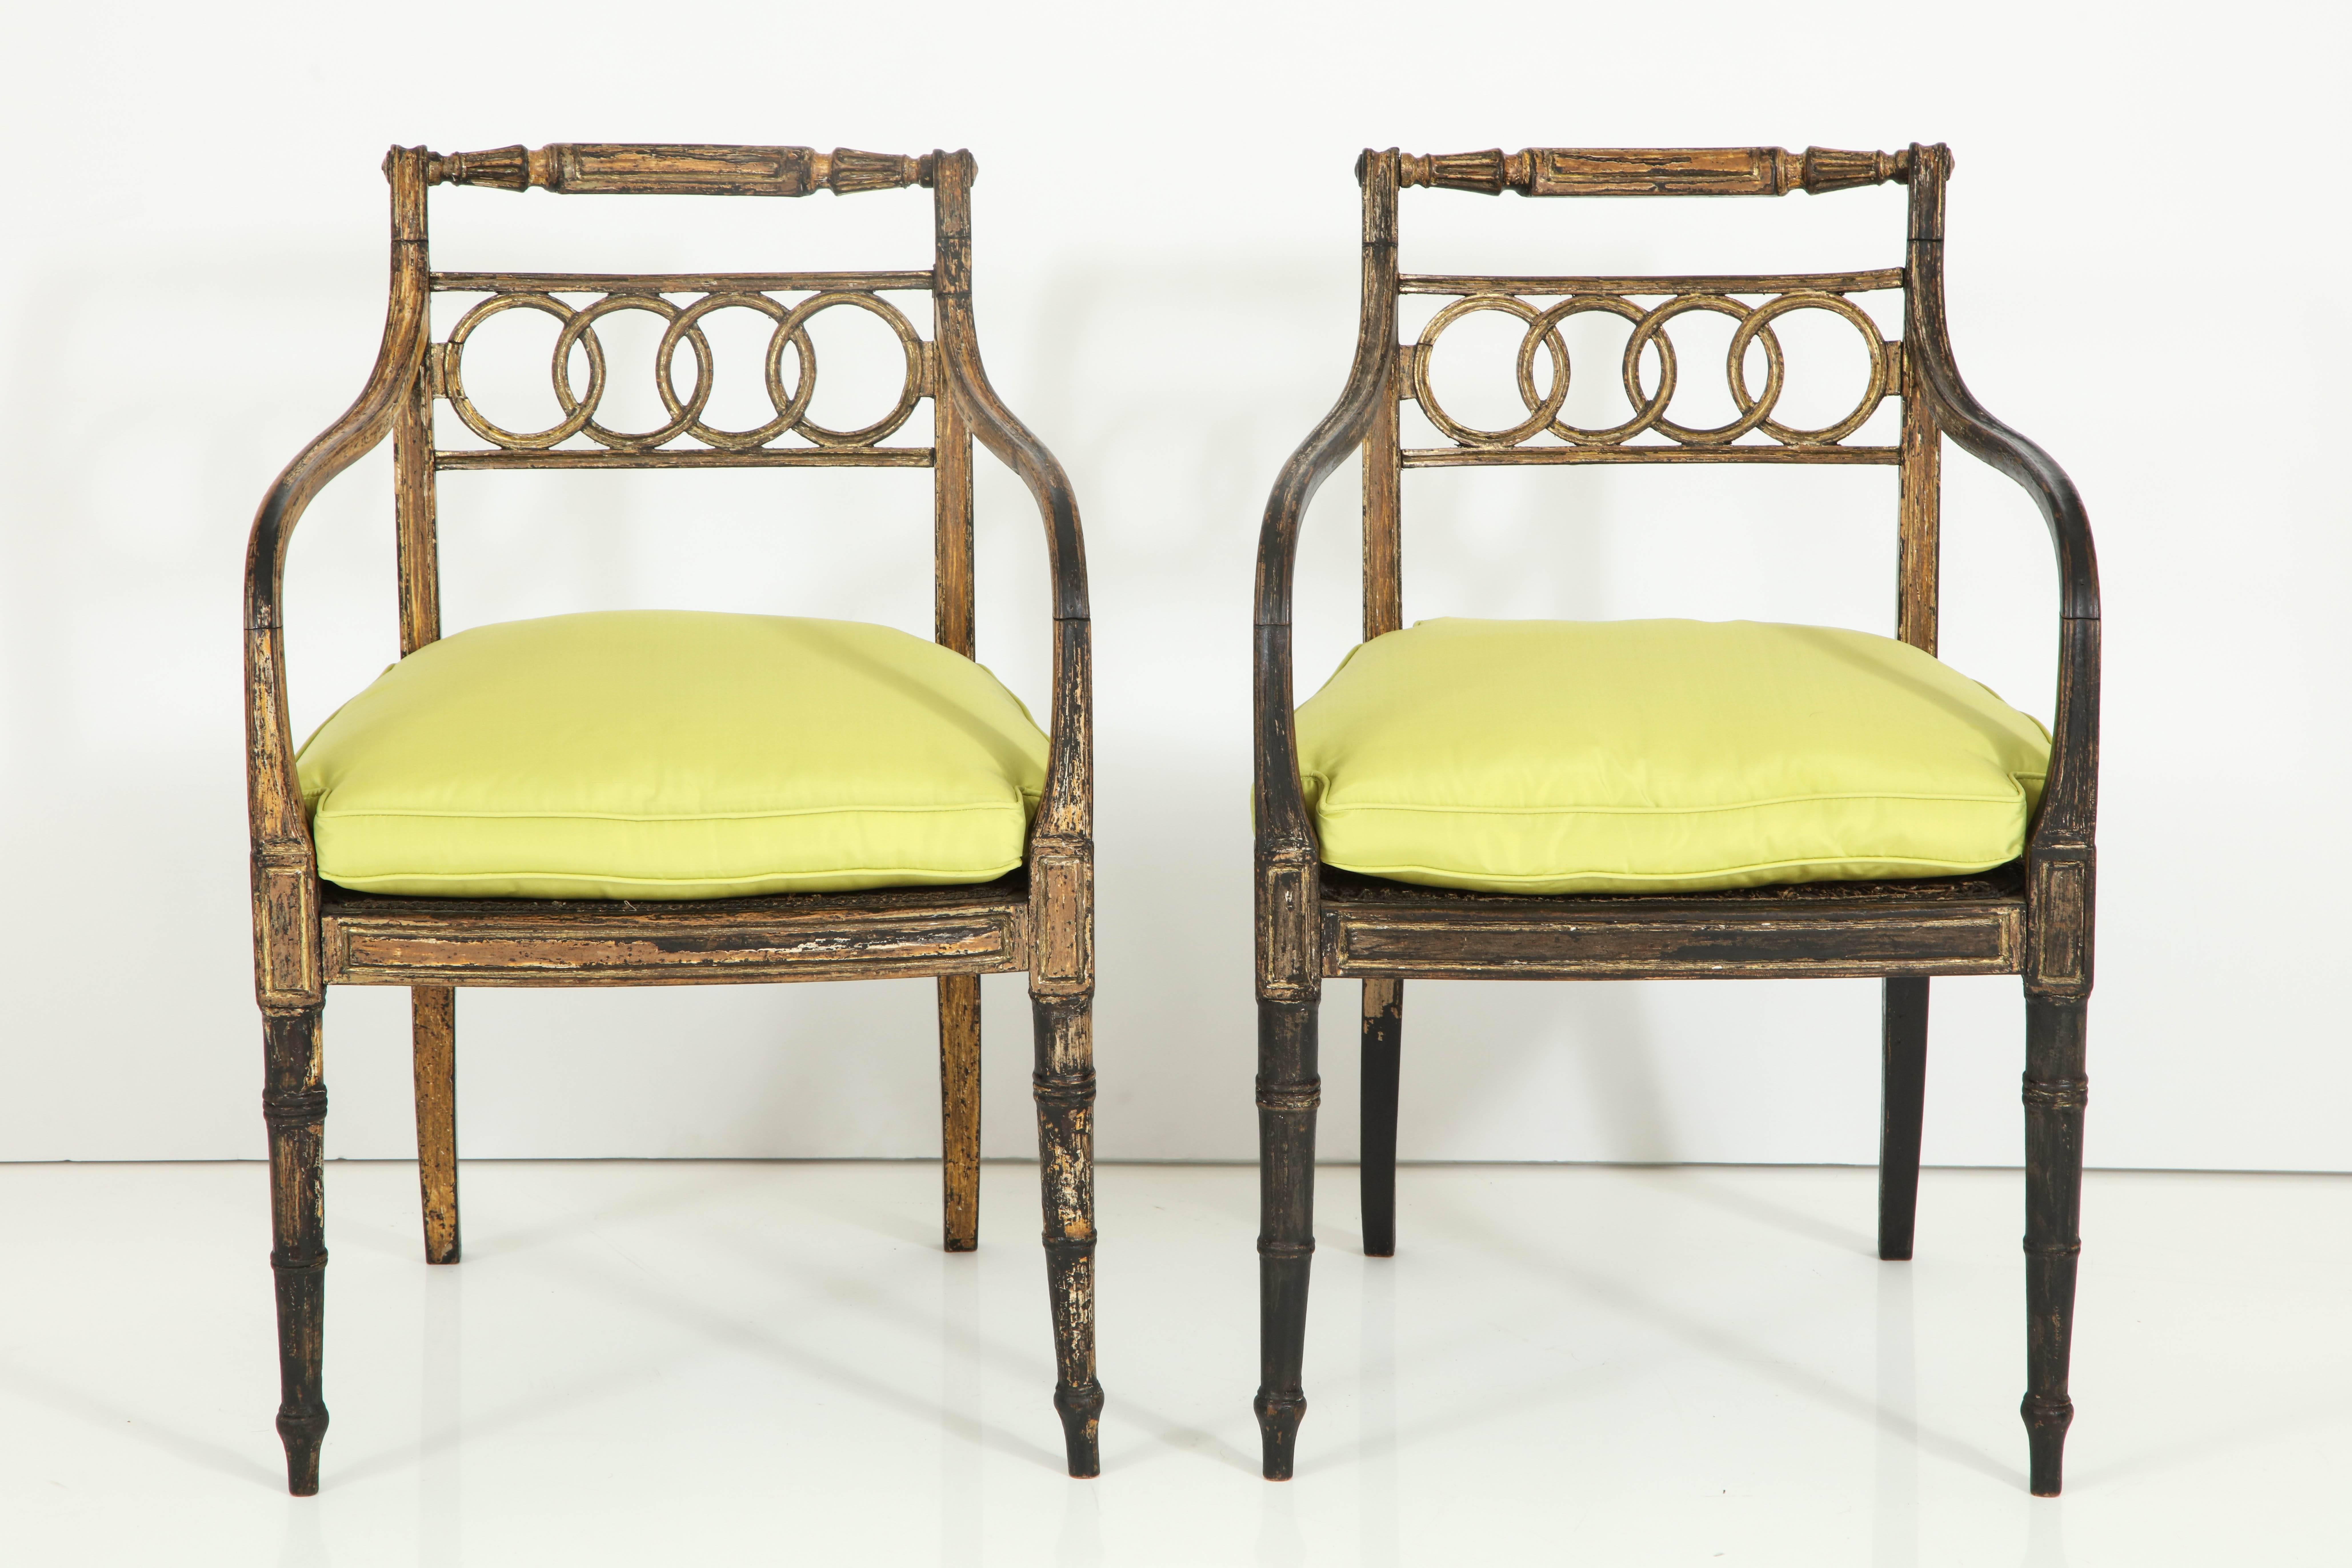 The detail and finish of these two chairs make them exceptional. Painted black with gold leaf accents, the chairs are replete with lovely neoclassical details, including the connecting rings on the back rest and the delicate turning on arms and